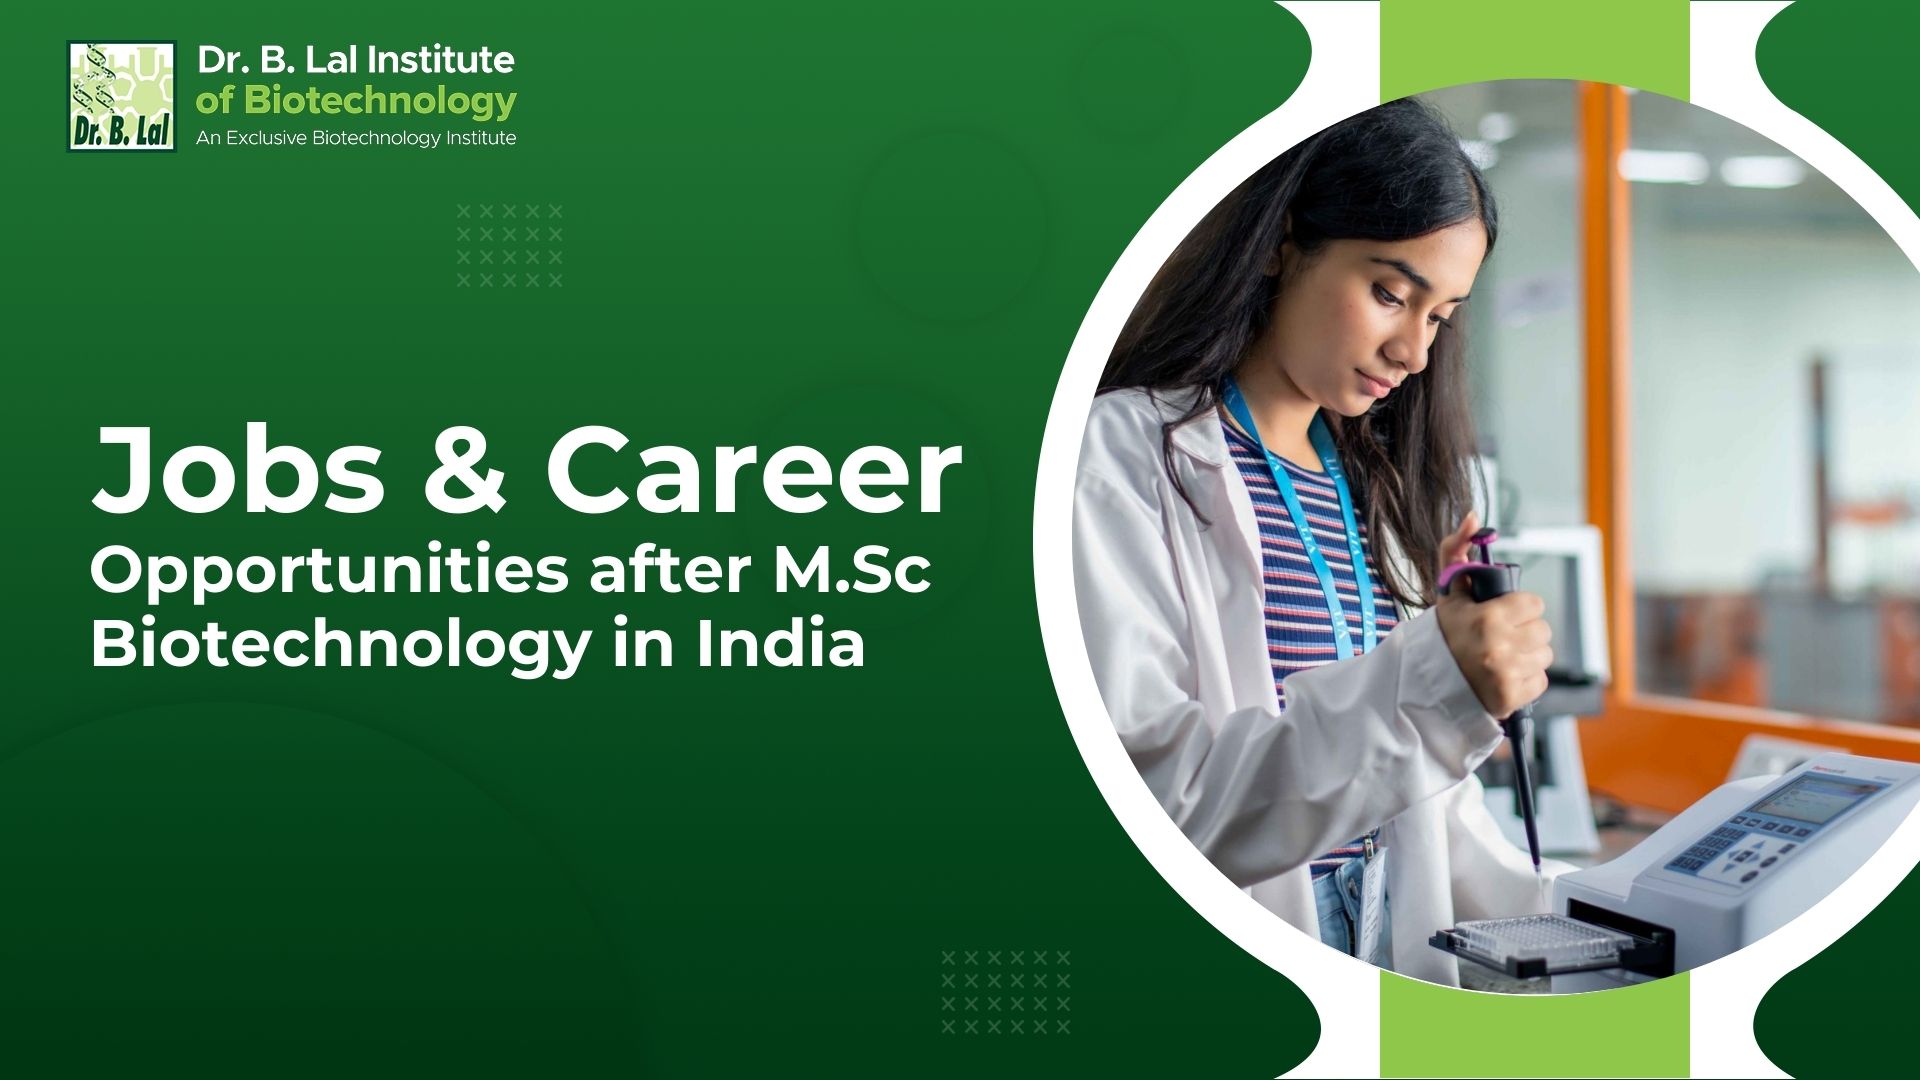 Jobs & Career Opportunities after M.sc Biotechnology in India